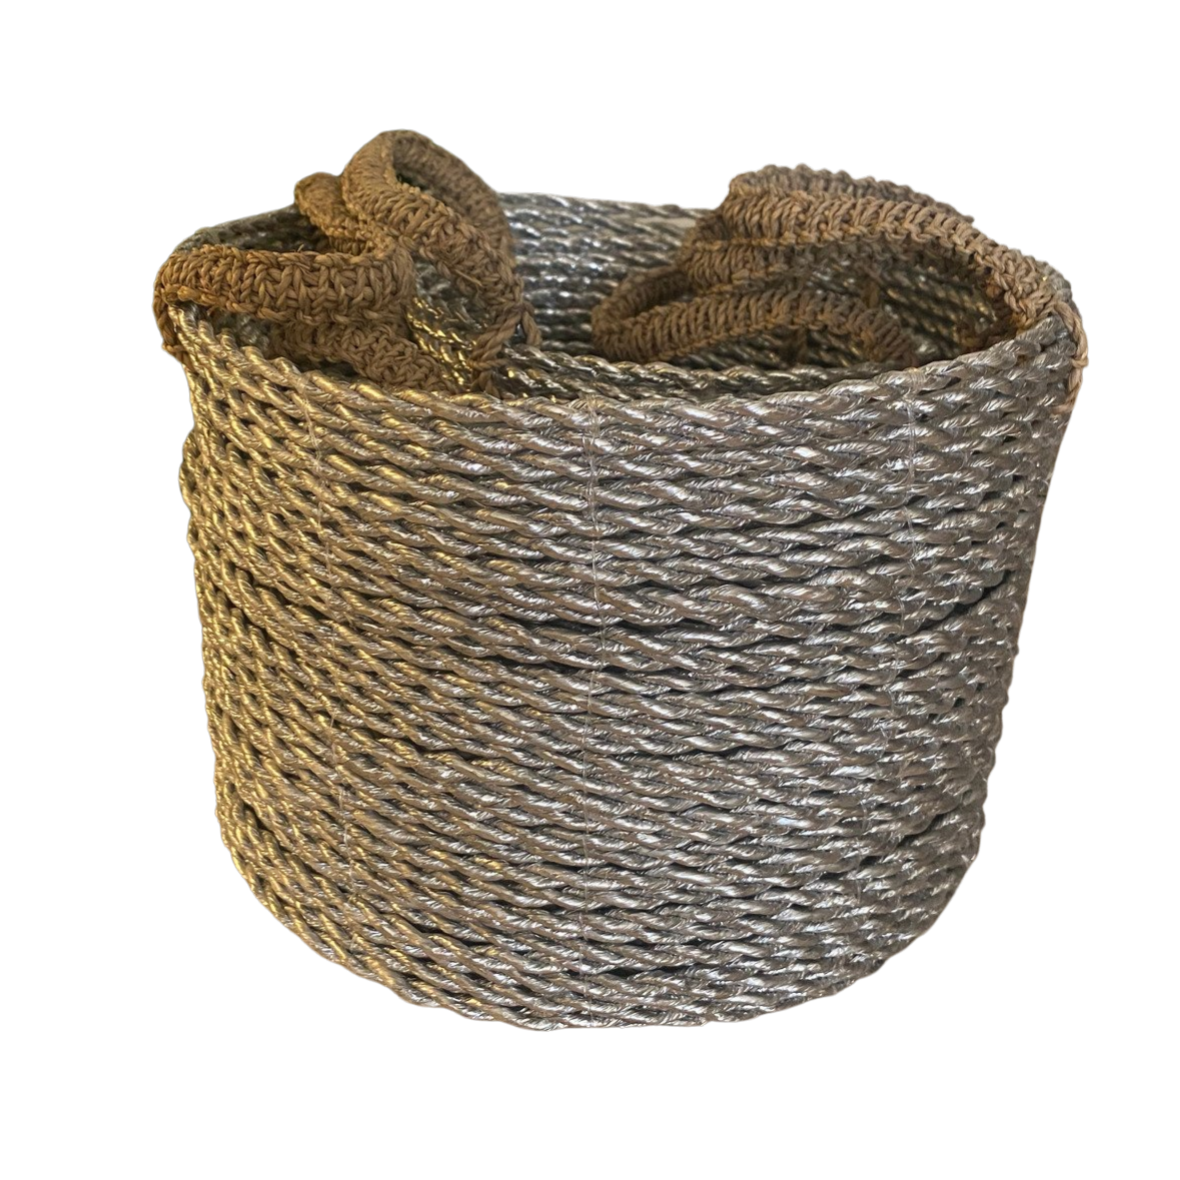 Silver baskets with natural handles